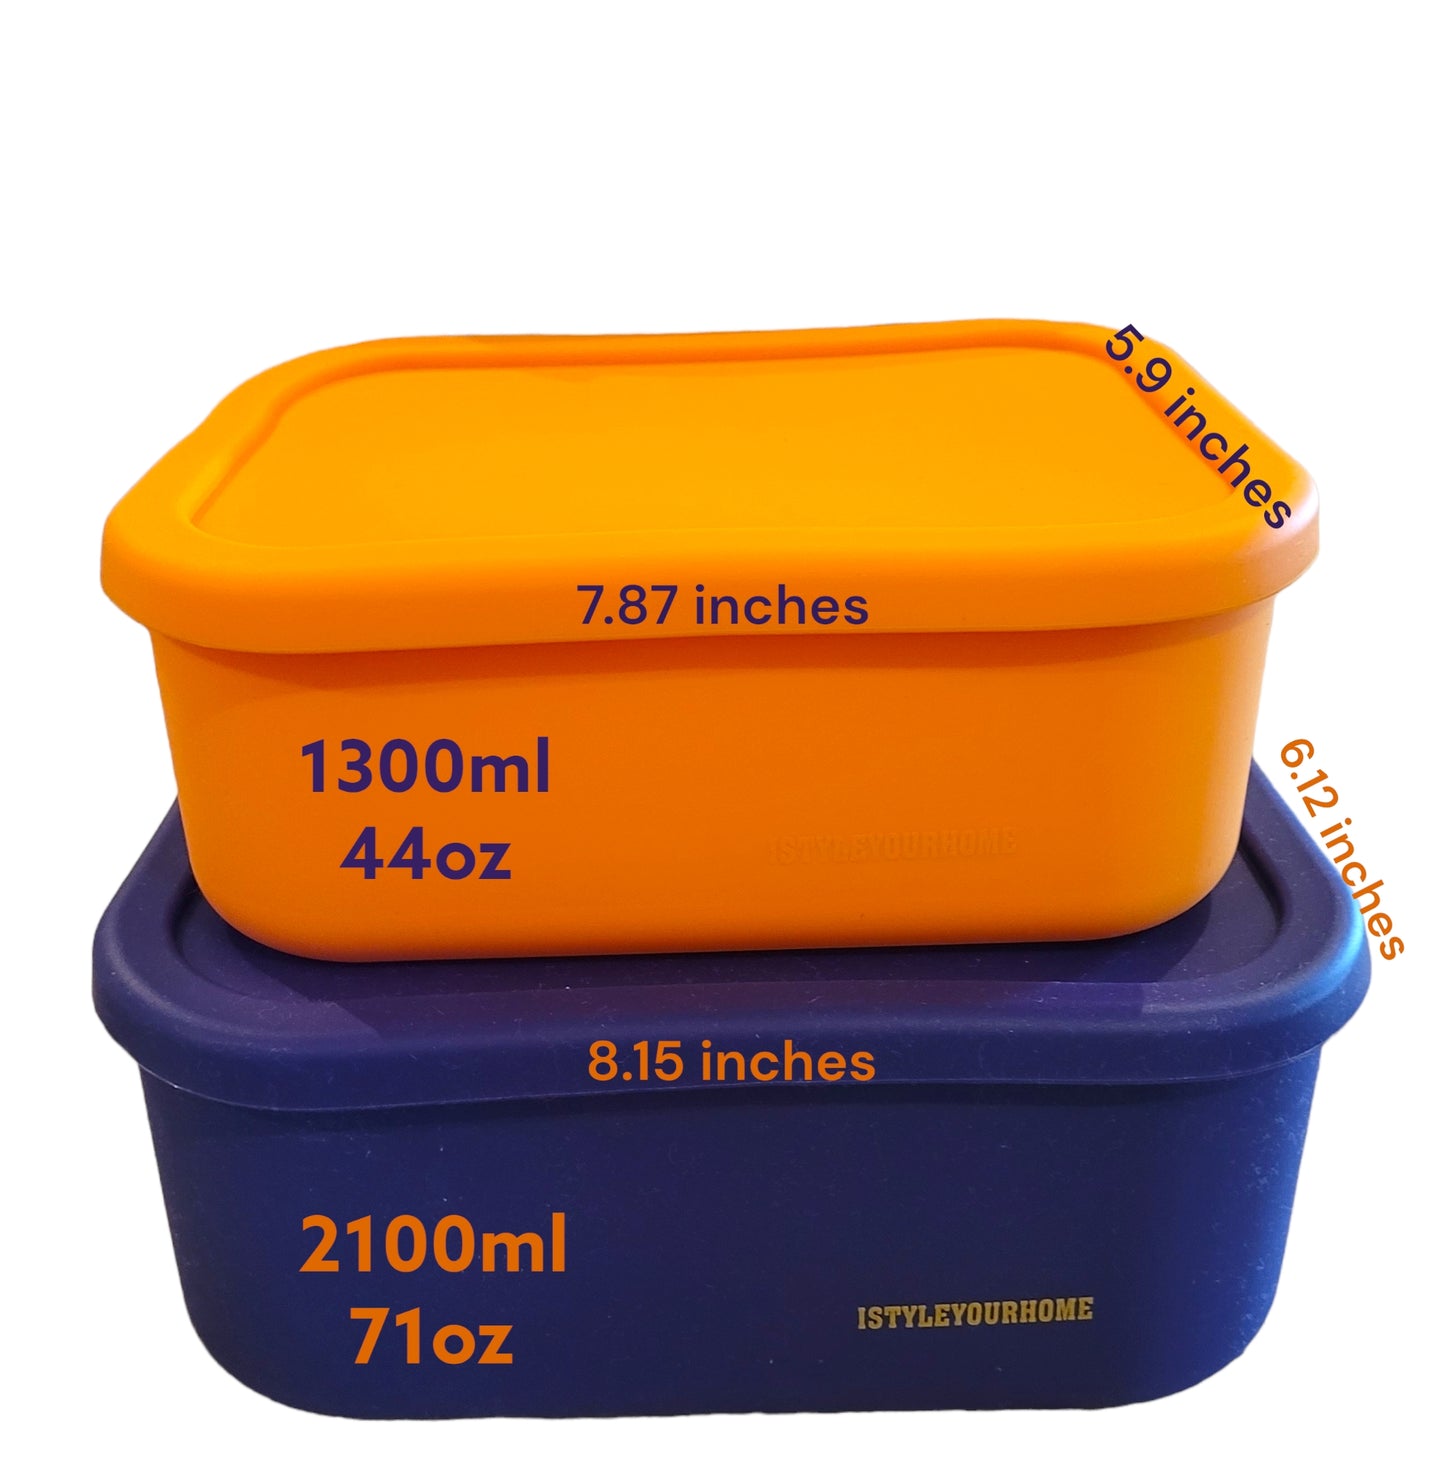 Silicone BENTO Food Storage Containers with Lids - Set of 2 Multi-Color in Canvas Bag (Purple-XL/Mustard-L)